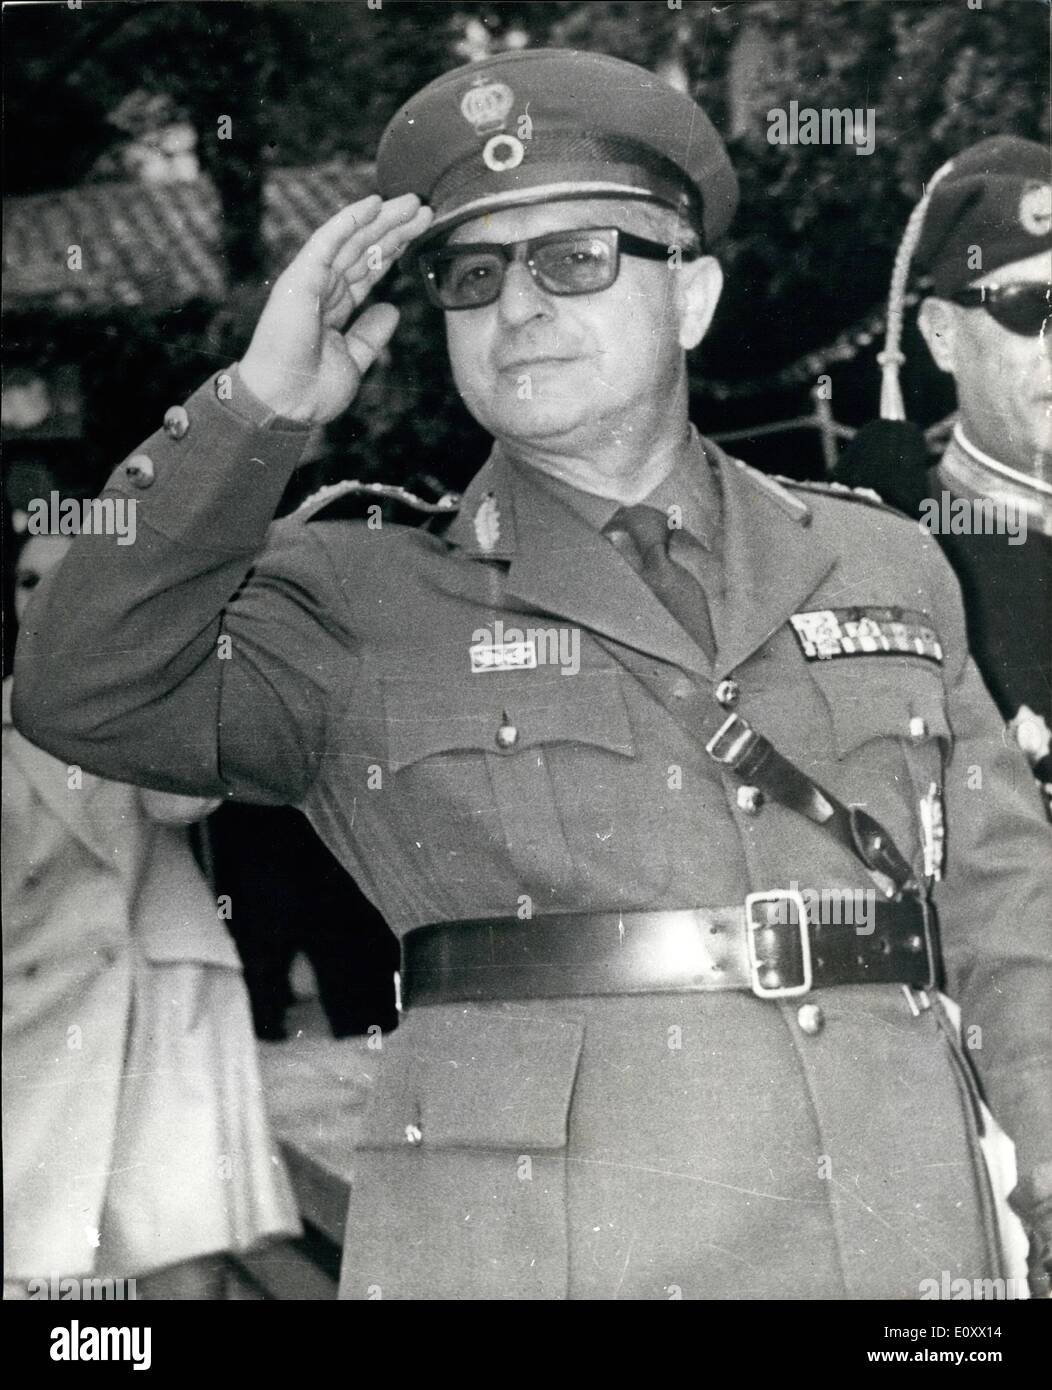 Dec. 12, 1967 - Greece's Regent: Photo shows a recent portrait of Gen. Zoitakis, who was appointed Regent following the departure from Greece of the Royal Family. Stock Photo